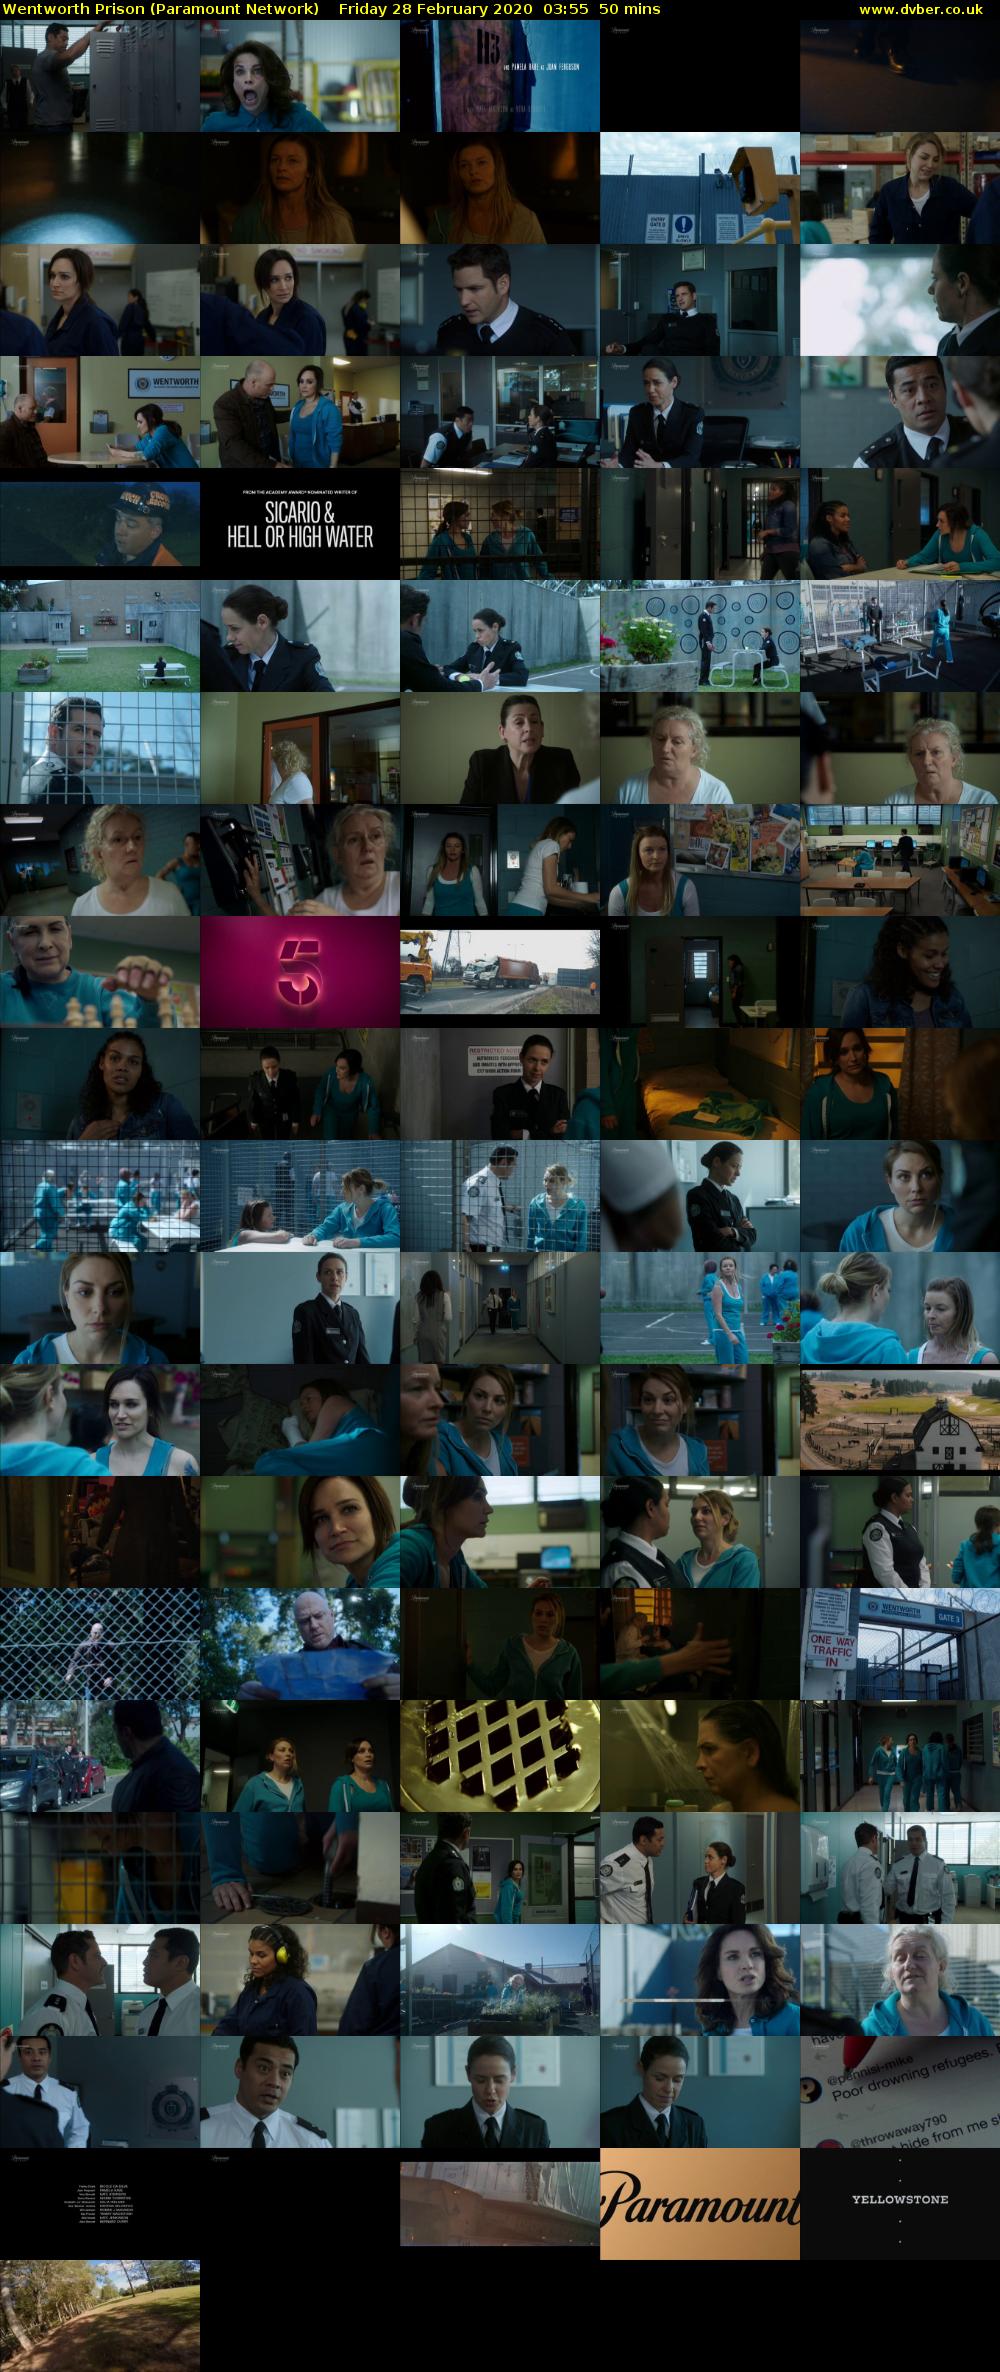 Wentworth Prison (Paramount Network) Friday 28 February 2020 03:55 - 04:45